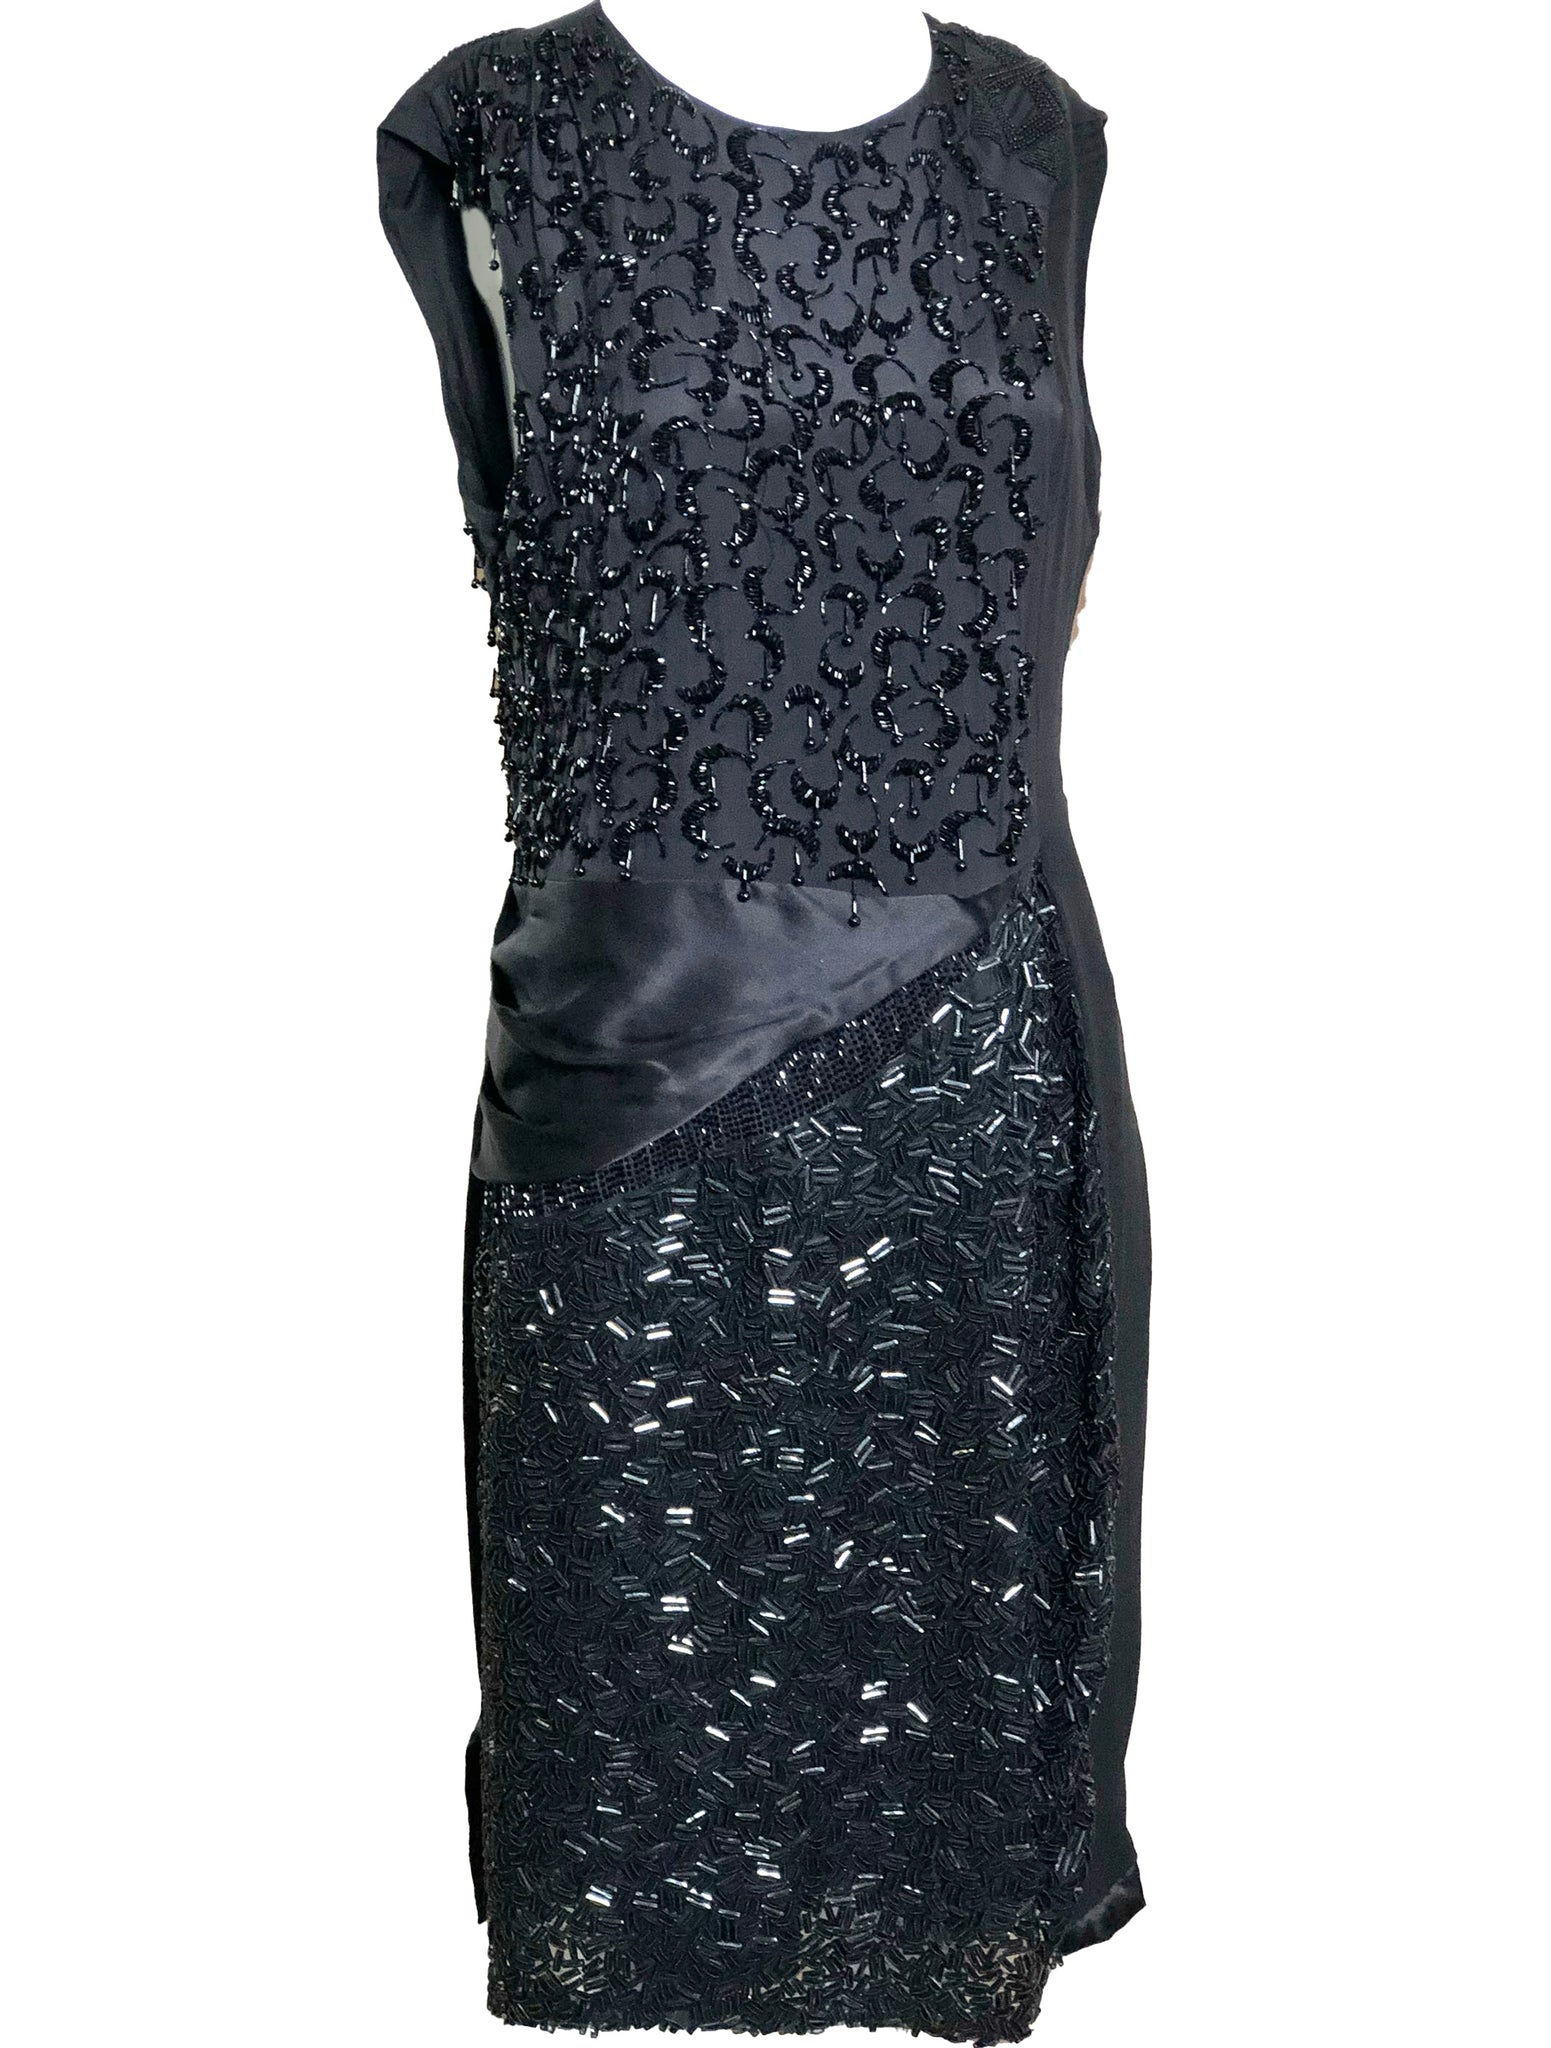 Dries Van Noten Early 2000s Black Silk Beaded Cocktail Dress ANGLE 2 of 5